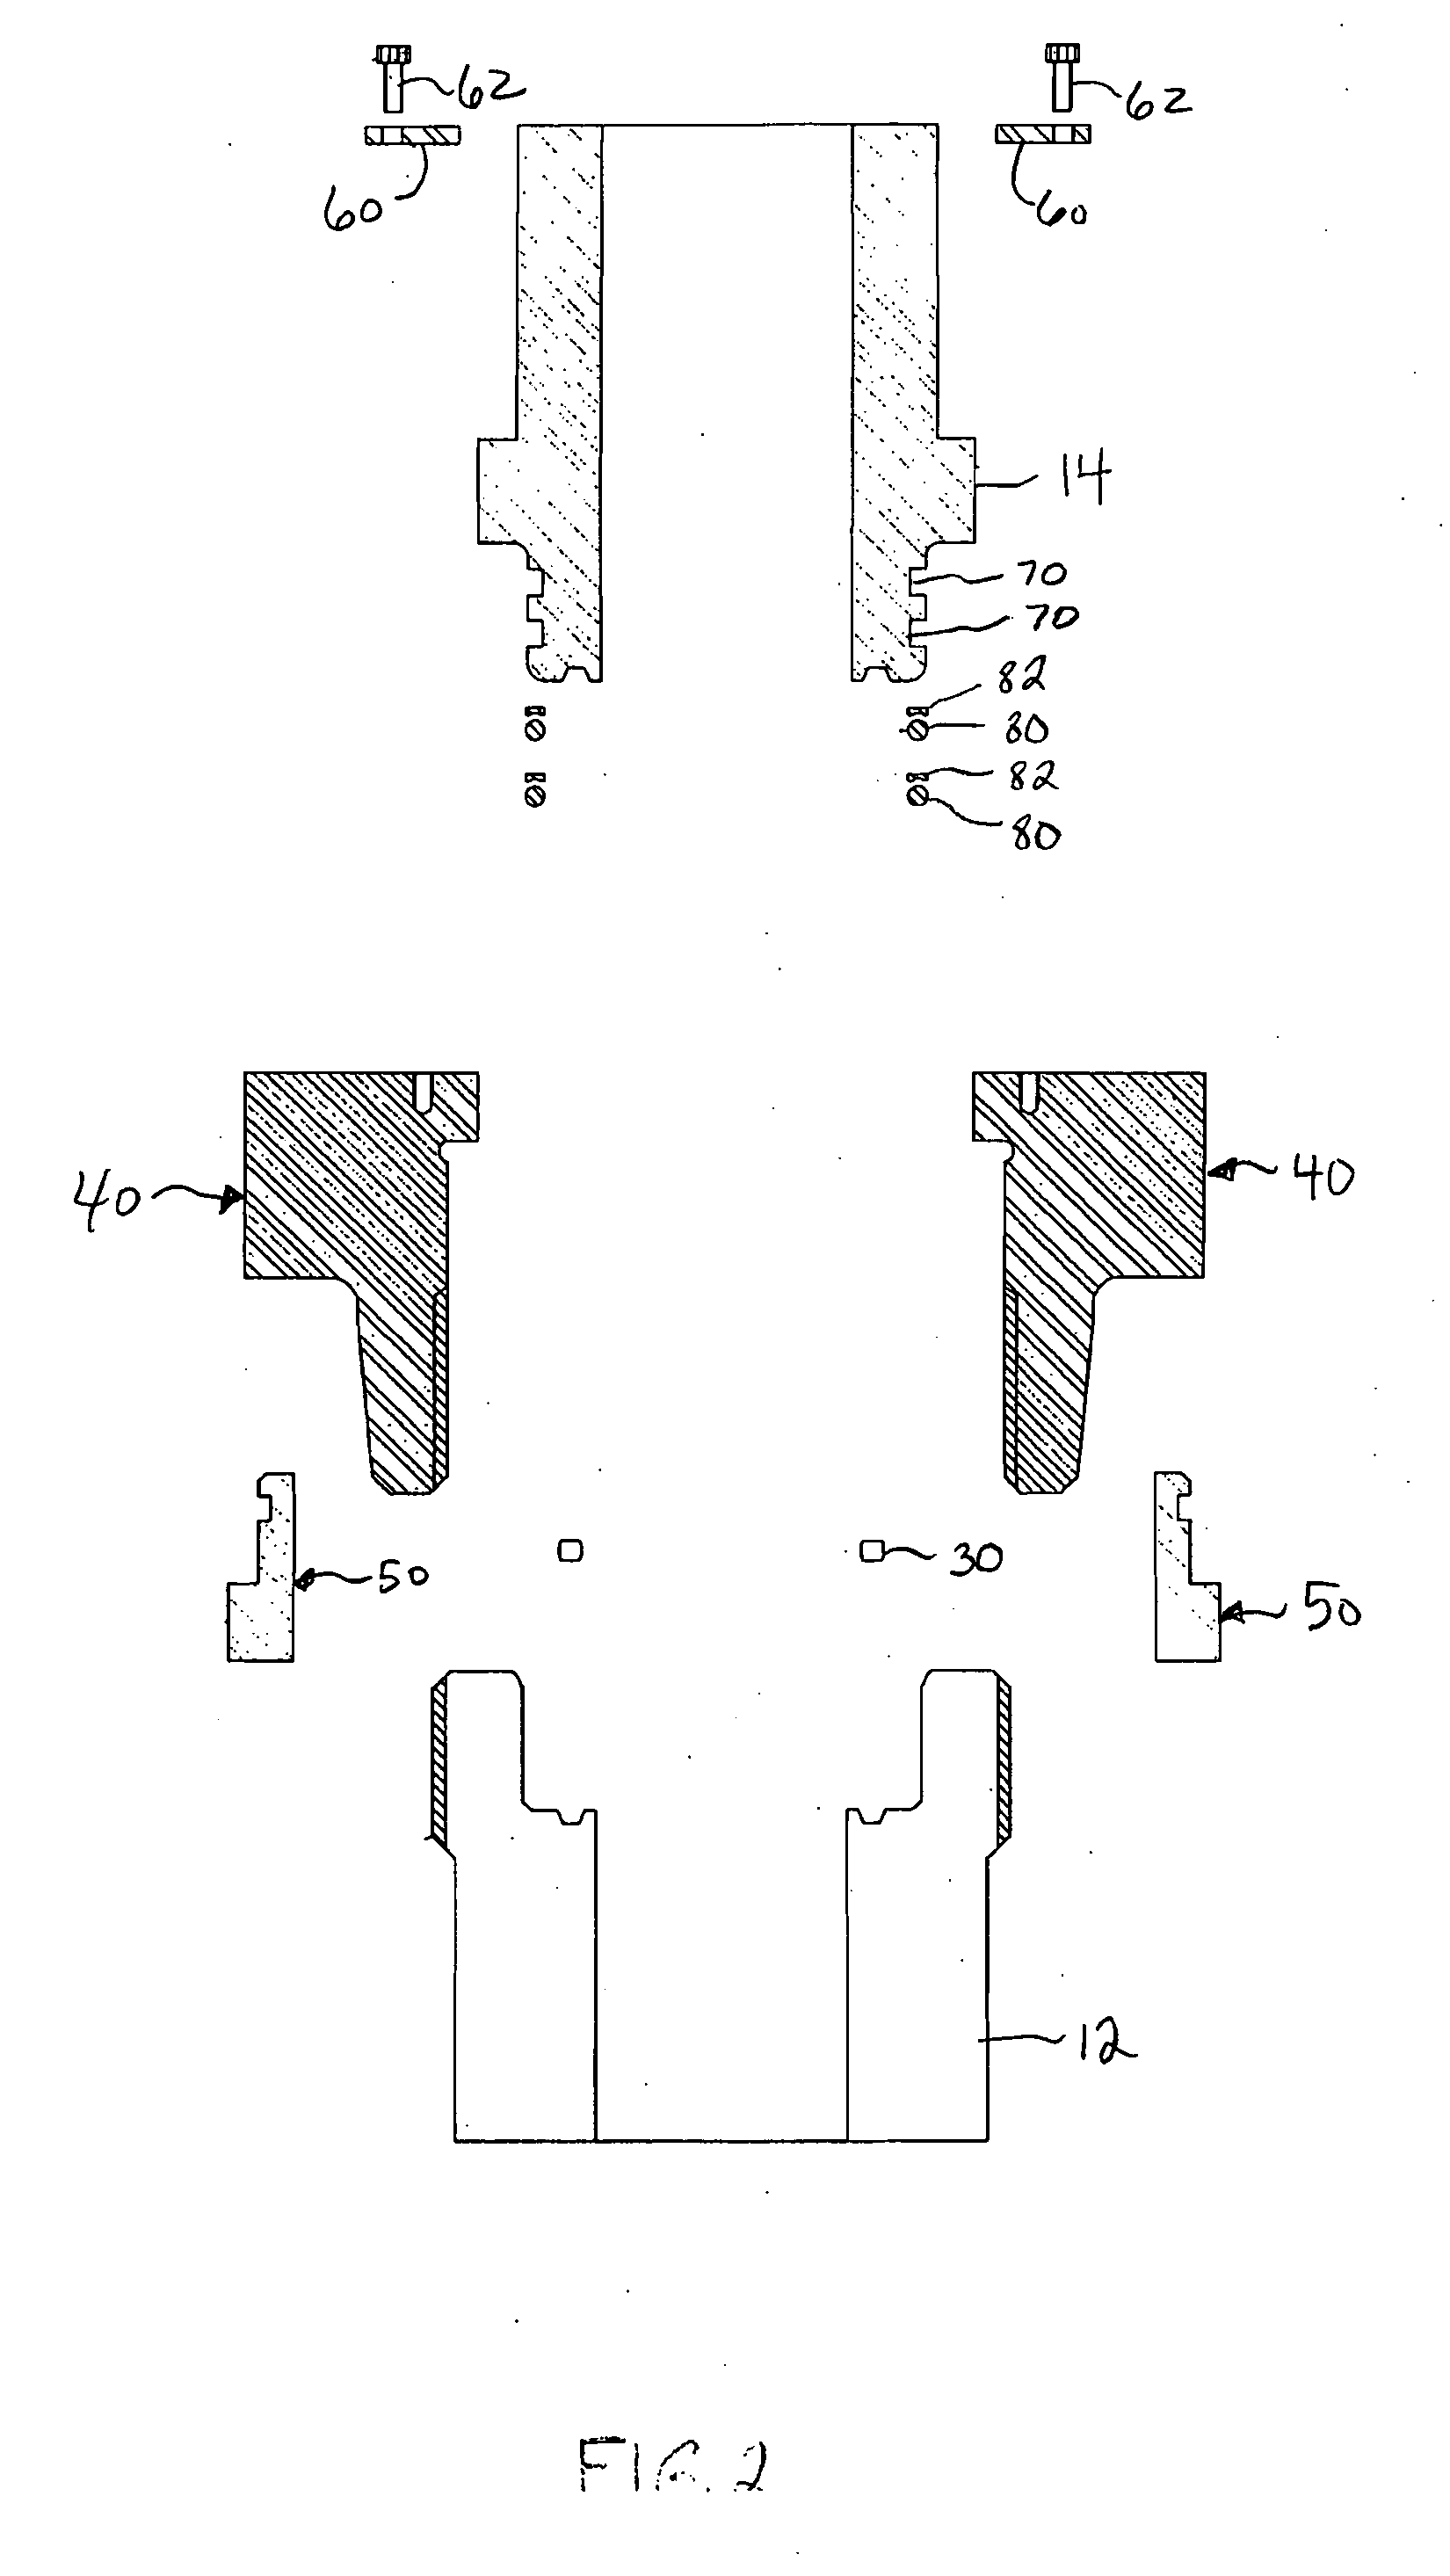 High-pressure threaded union with metal-to-metal seal, and metal ring gasket for same